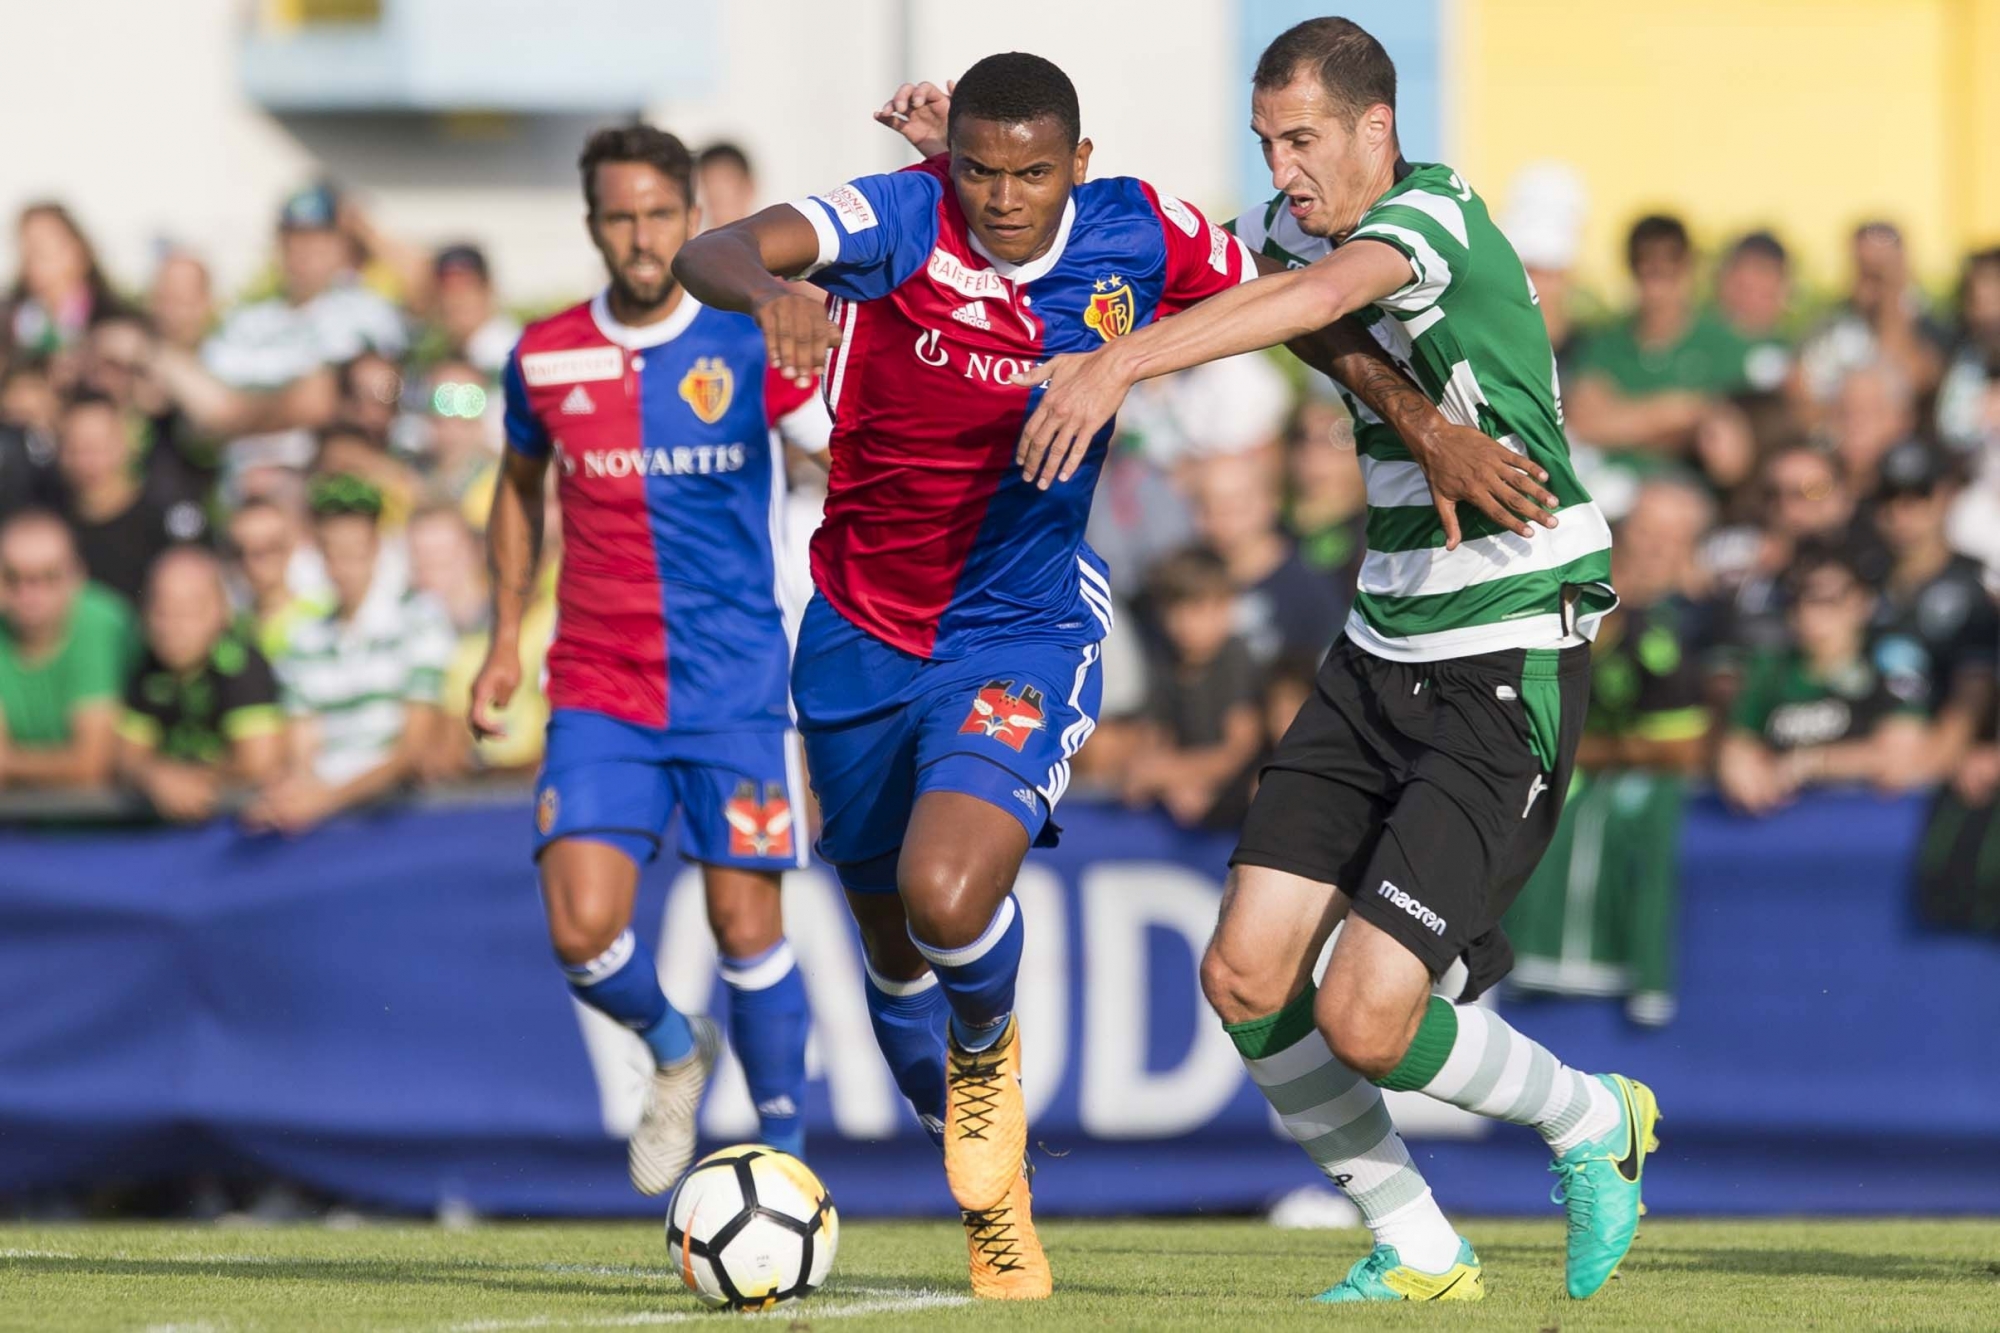 Basel's Manuel Akanji, left, fights for the ball with Sportingís Radosav Petrovic, right, during a friendly soccer match as part of the Festival de Football des Alpes between FC Basel of Switzerland and Sporting Clube of Portugal, at the Stadium of Greves, in Portalban, Switzerland, Saturday, July 15, 2017. (KEYSTONE/Thomas Delley).